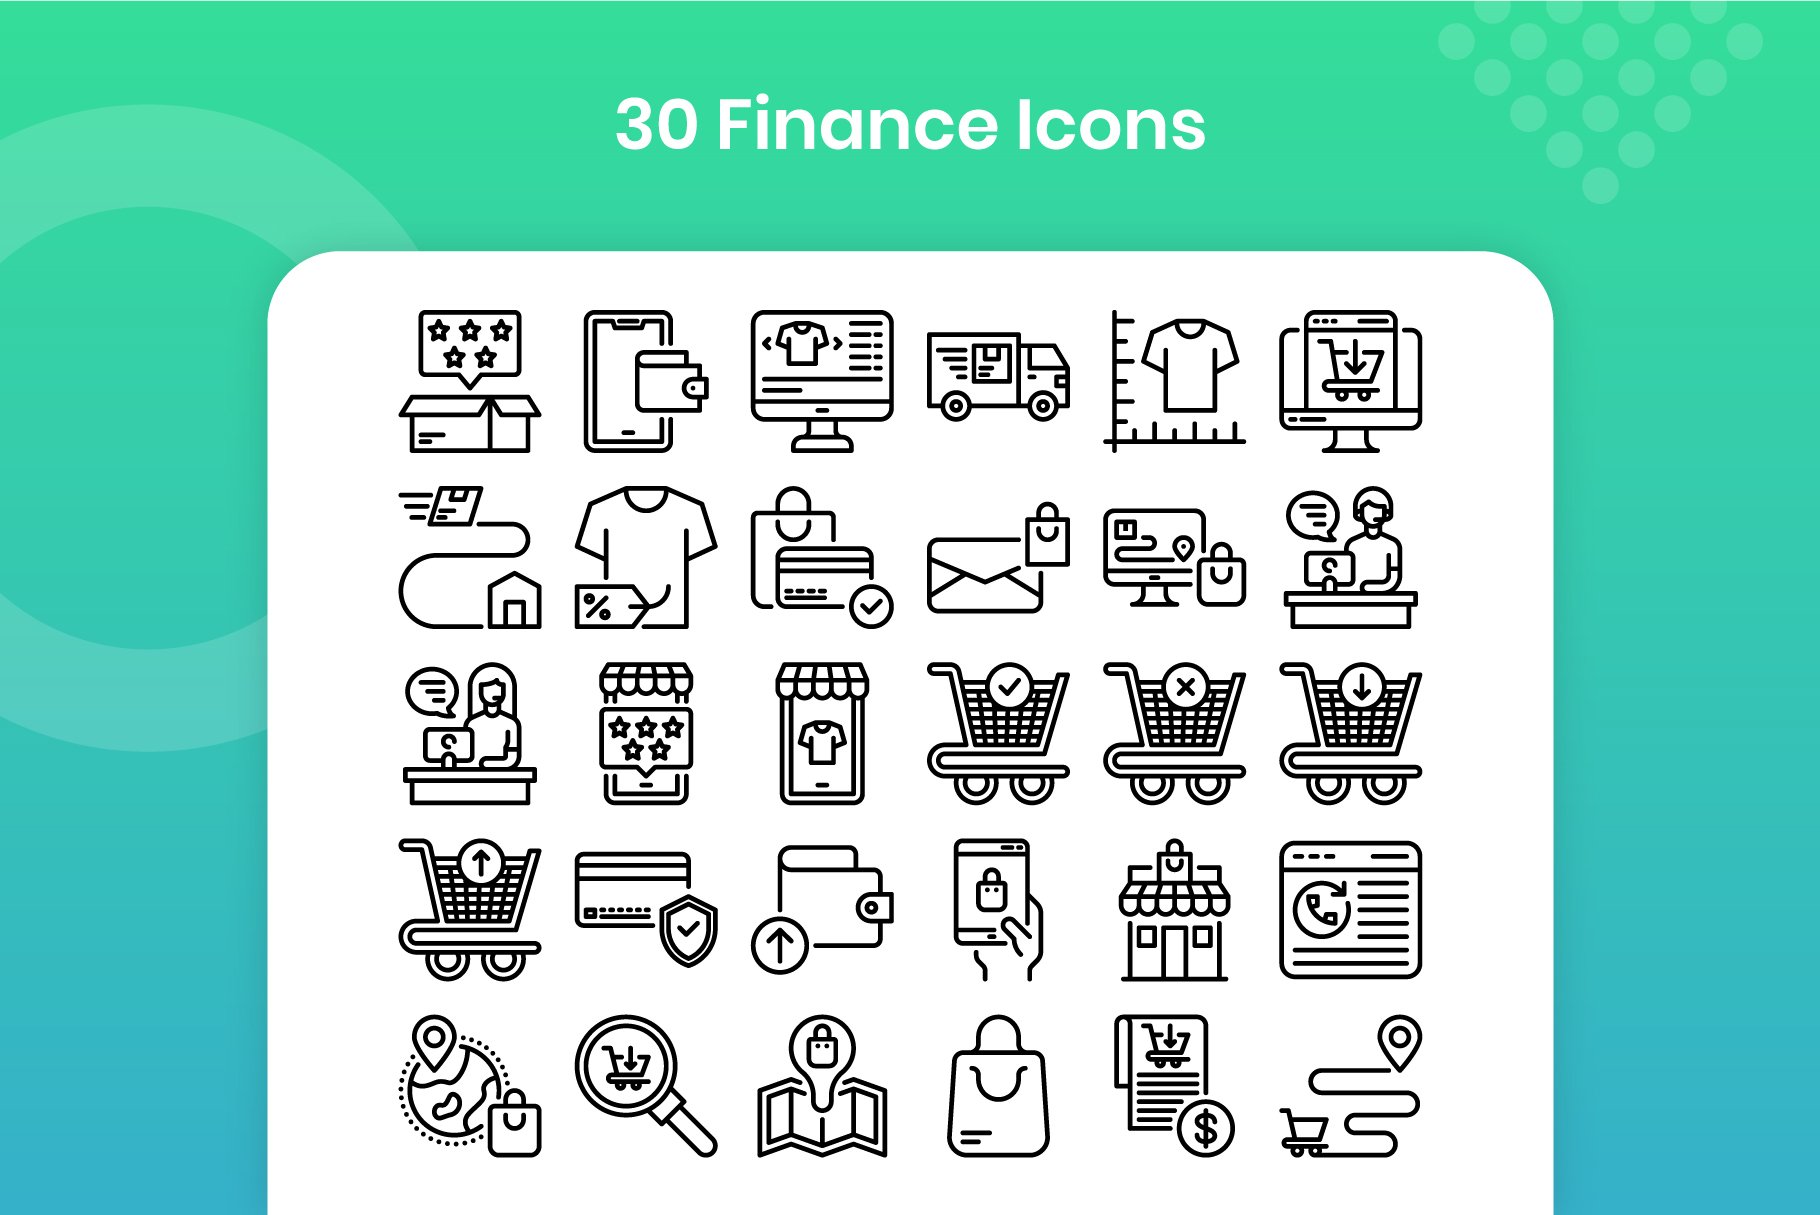 30 Finance Icons Set - Line preview image.